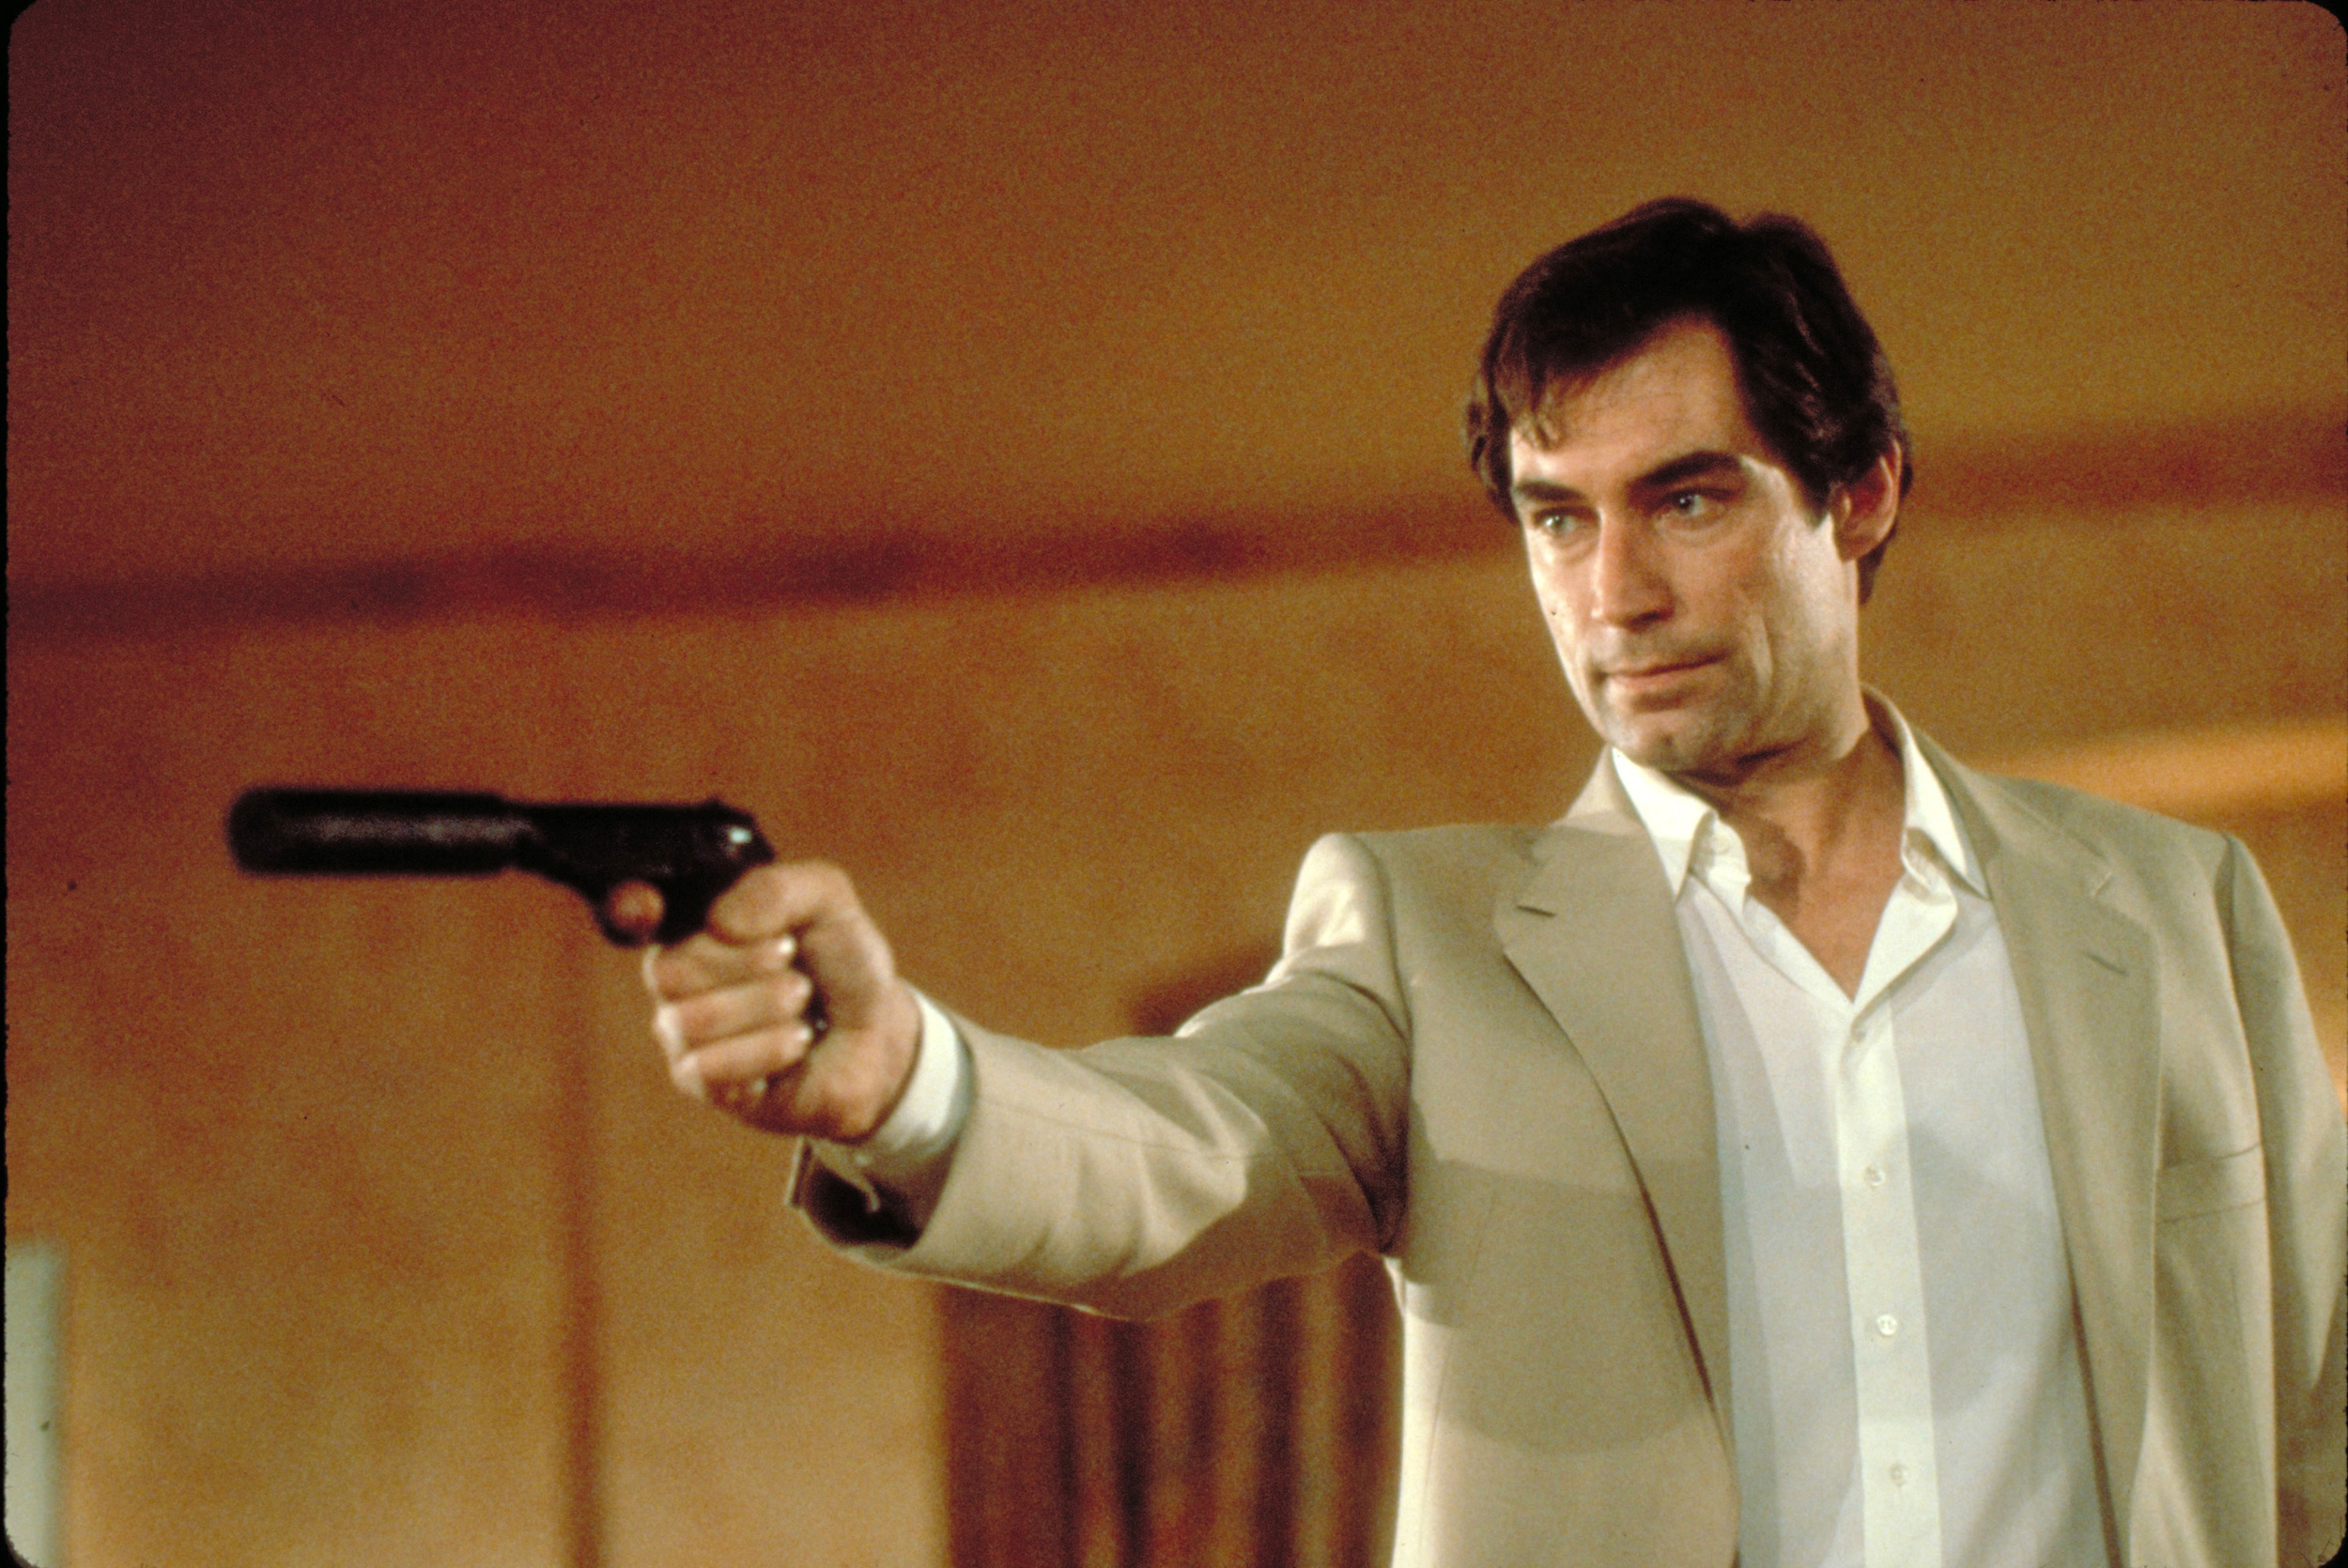 <p>The most underrated Bond film also happens to star the franchise’s most underappreciated 007. Timothy Dalton lacked the brash novelty of Connery or the familiarity of Moore when he took over the role in 1987. He possessed the unremarkable physical bearing of the character initially envisioned by Fleming, and he might’ve pulled off a gritty, Craig-like reboot had the producers been willing to go against the blockbuster grain in the era of Stallone and Schwarzenegger. This is a big movie with a sweeping Barry score (his last for the series); the plot is hopelessly convoluted, but it’s at least more serious and somewhat grounded compared to most of the Moore films. It’s a hugely enjoyable film, and it’s to Dalton’s credit that his underplayed Bond doesn’t get lost in the ruckus.</p><p><a href='https://www.msn.com/en-us/community/channel/vid-cj9pqbr0vn9in2b6ddcd8sfgpfq6x6utp44fssrv6mc2gtybw0us'>Follow us on MSN to see more of our exclusive entertainment content.</a></p>